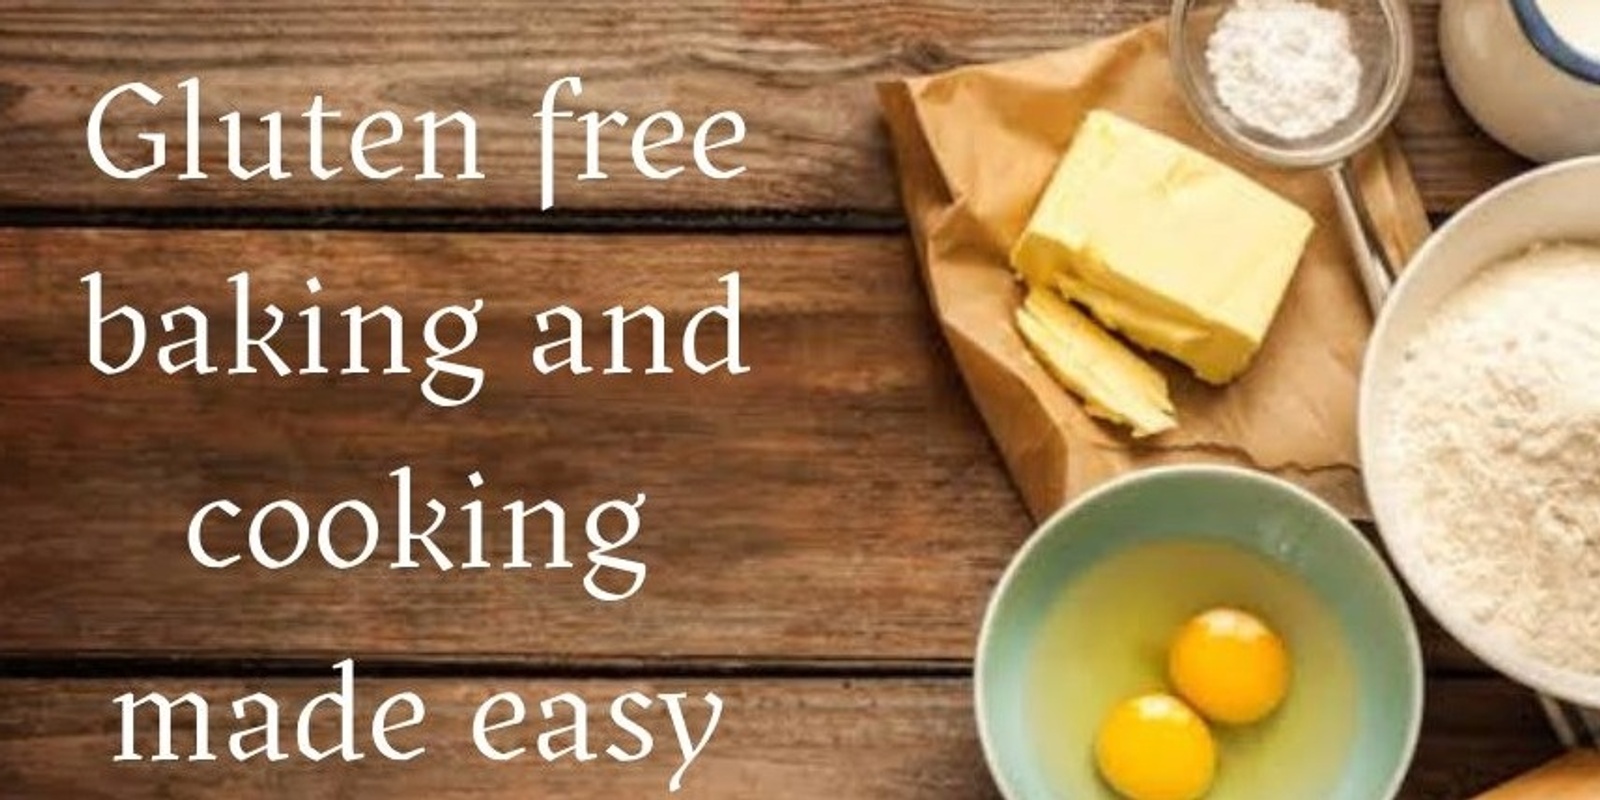 Banner image for Gluten-free baking and cooking made easy